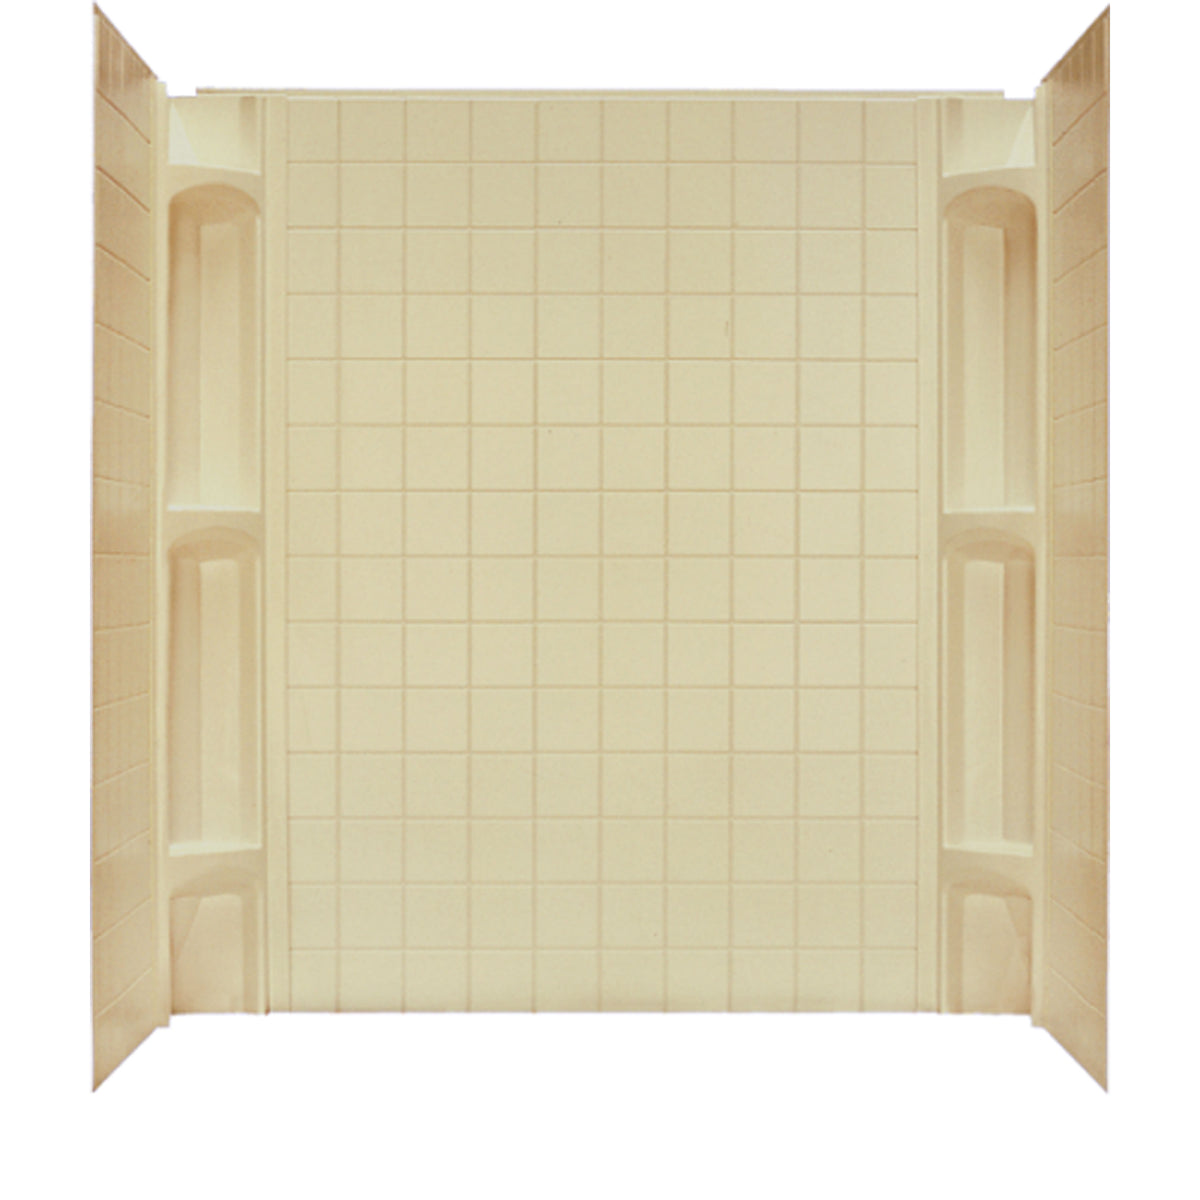 Kinro ALM-CWS27-SPK Three-Piece Tub Surround for use with Corner Caddy - 27 in. x 54 in., Almond